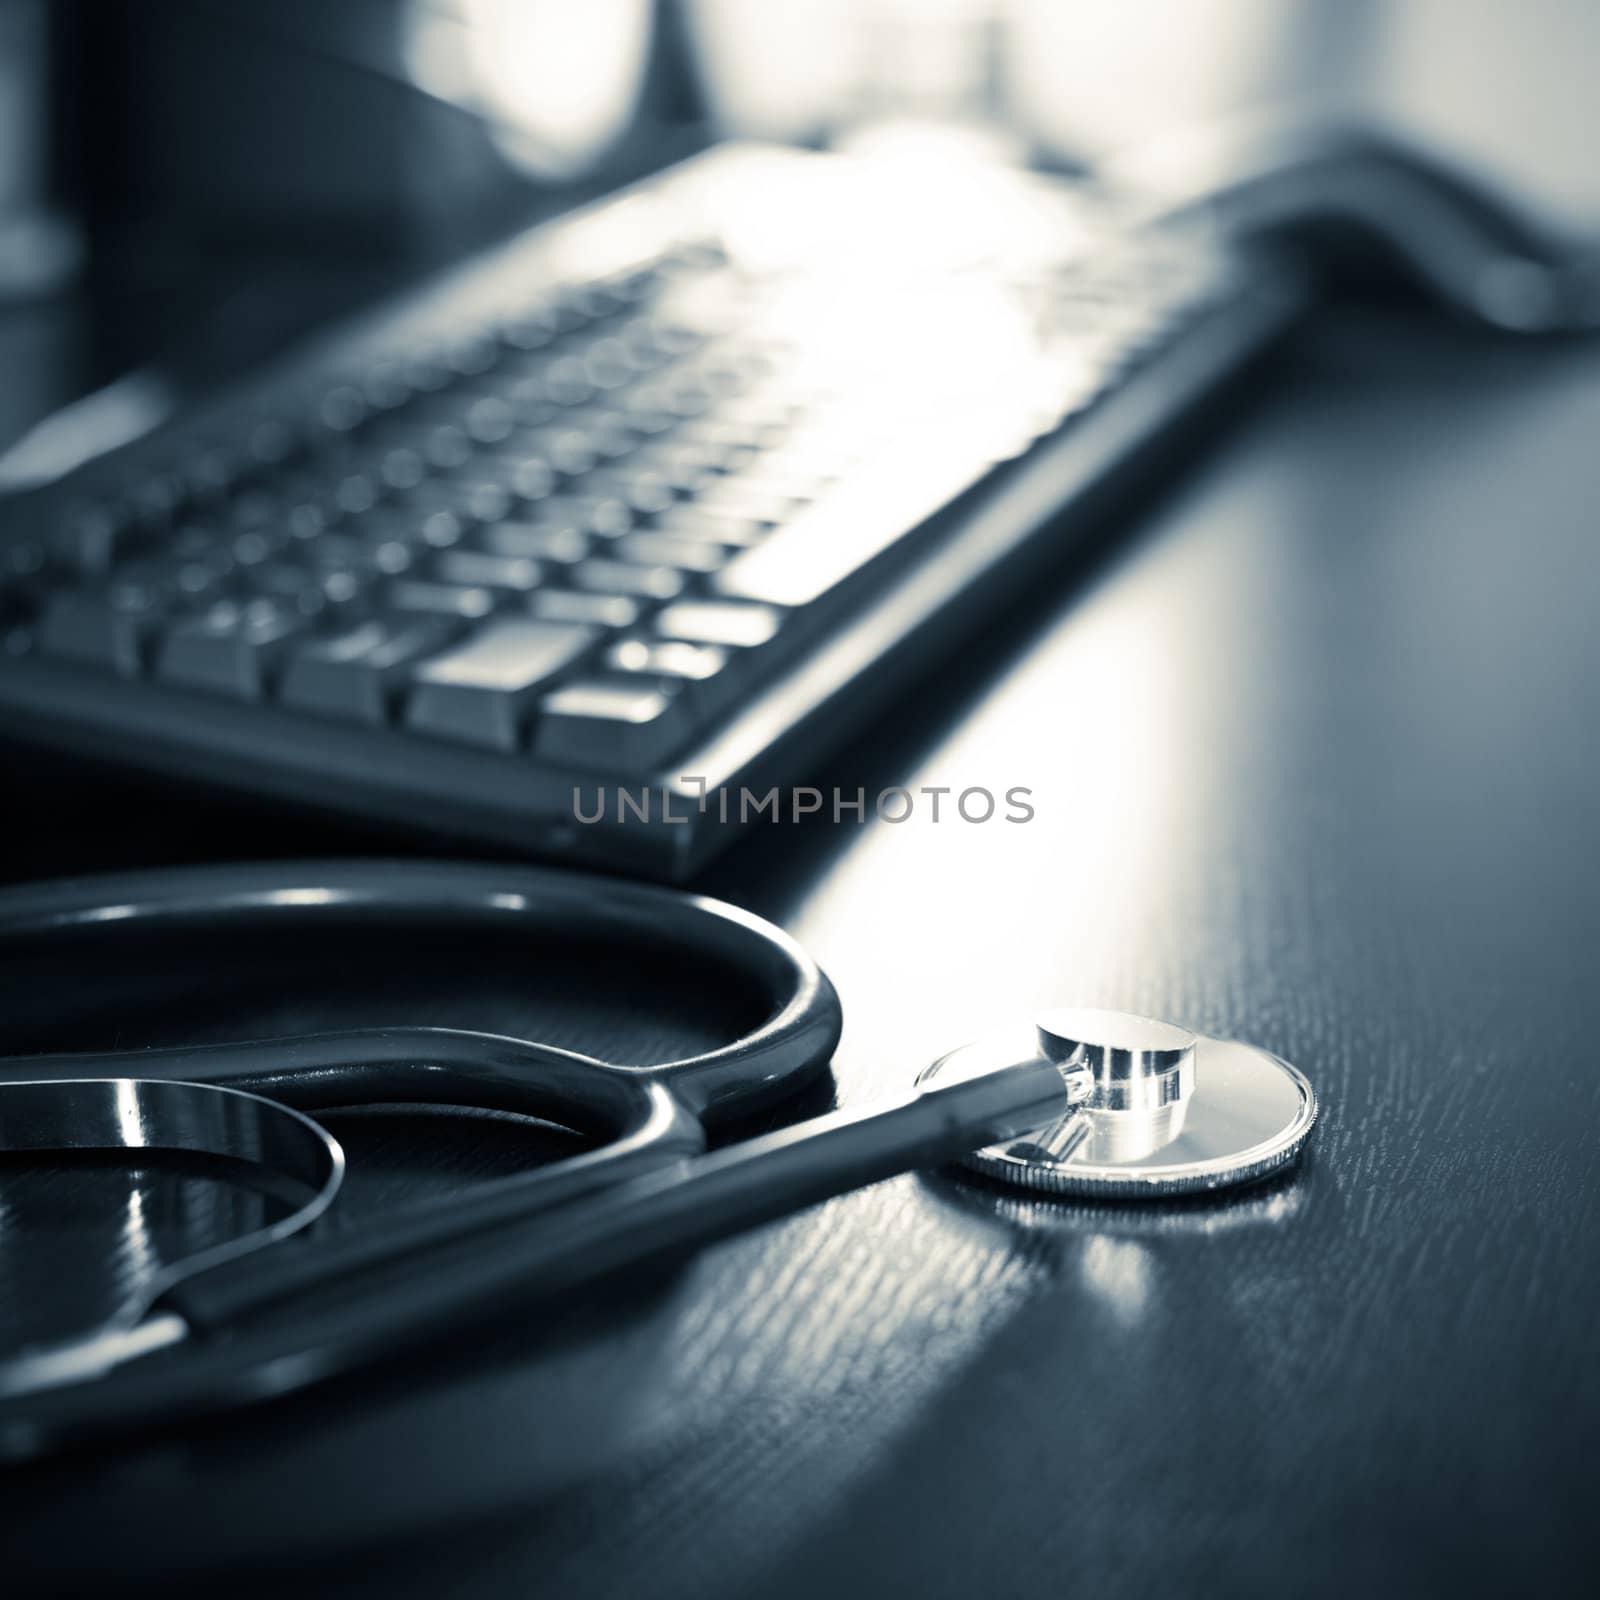 Stethoscope with keyboard by naumoid